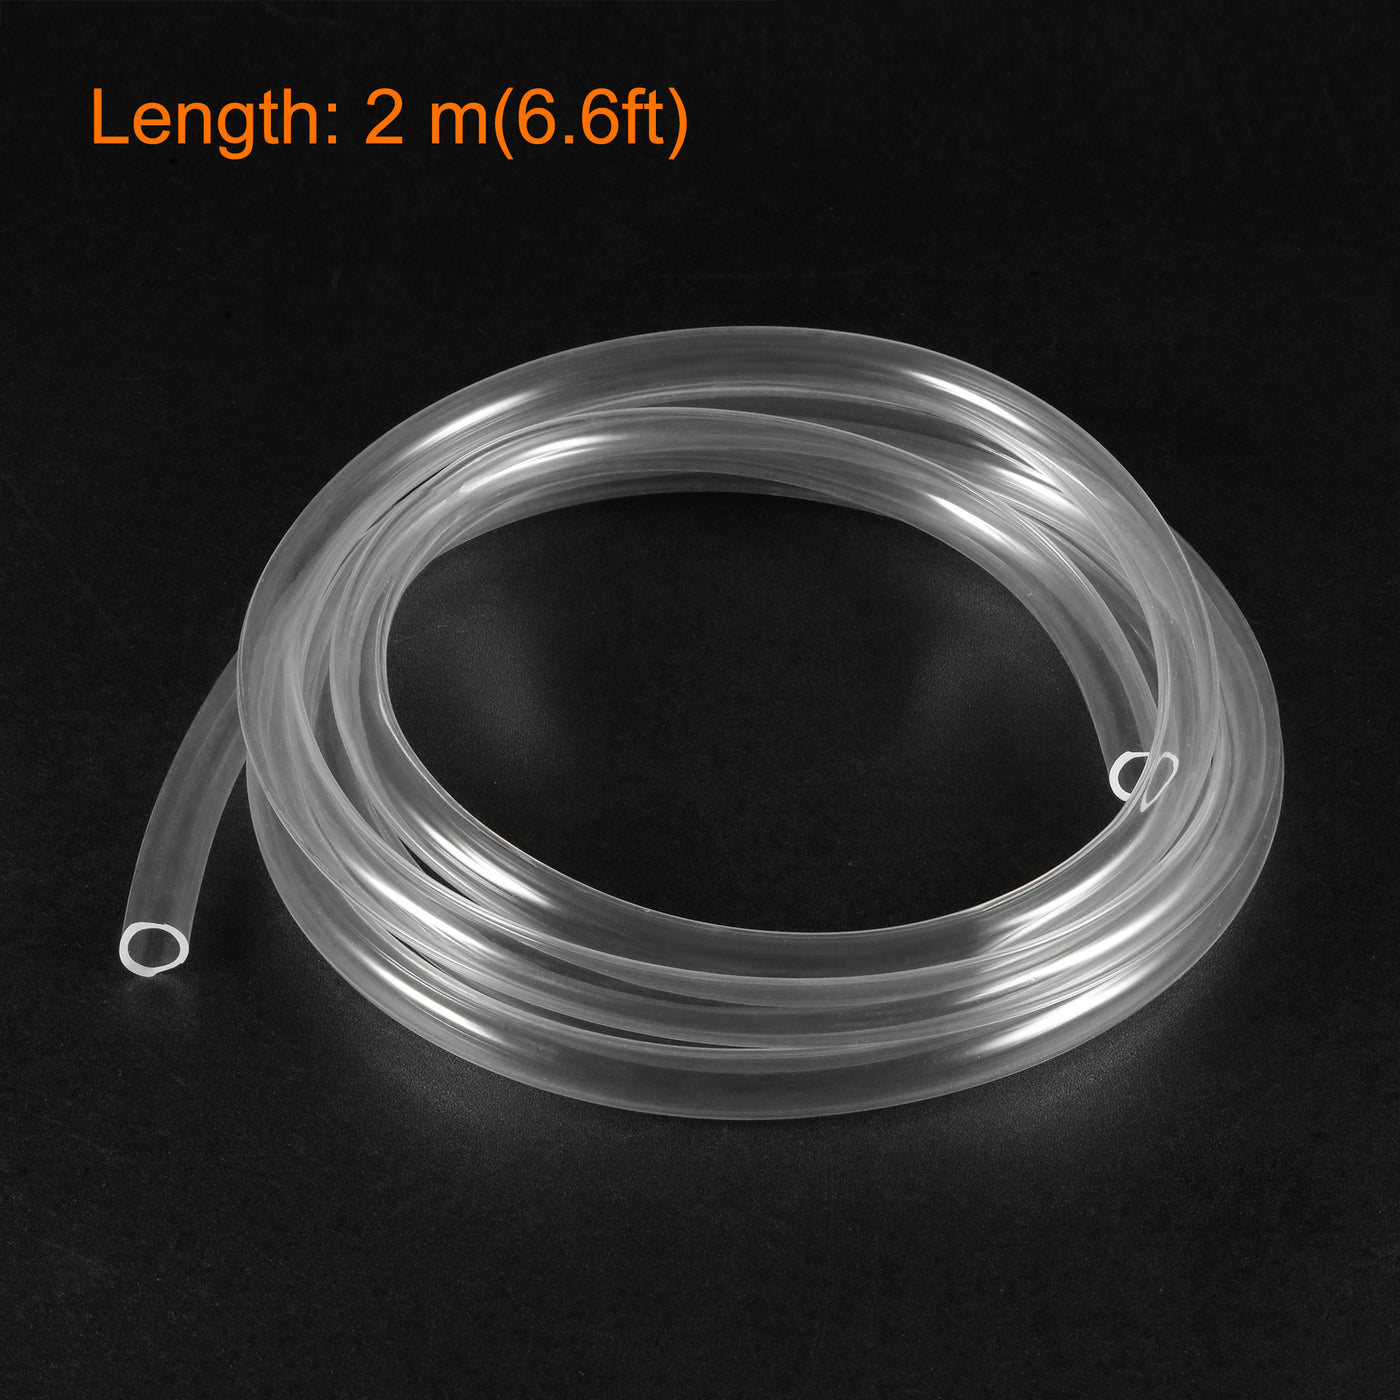 Uxcell Uxcell PVC Clear Vinyl Tubing, 12mm(1/2") ID 16mm(5/8") OD 6.6ft Plastic Pipe Air Water Hose with Clamps